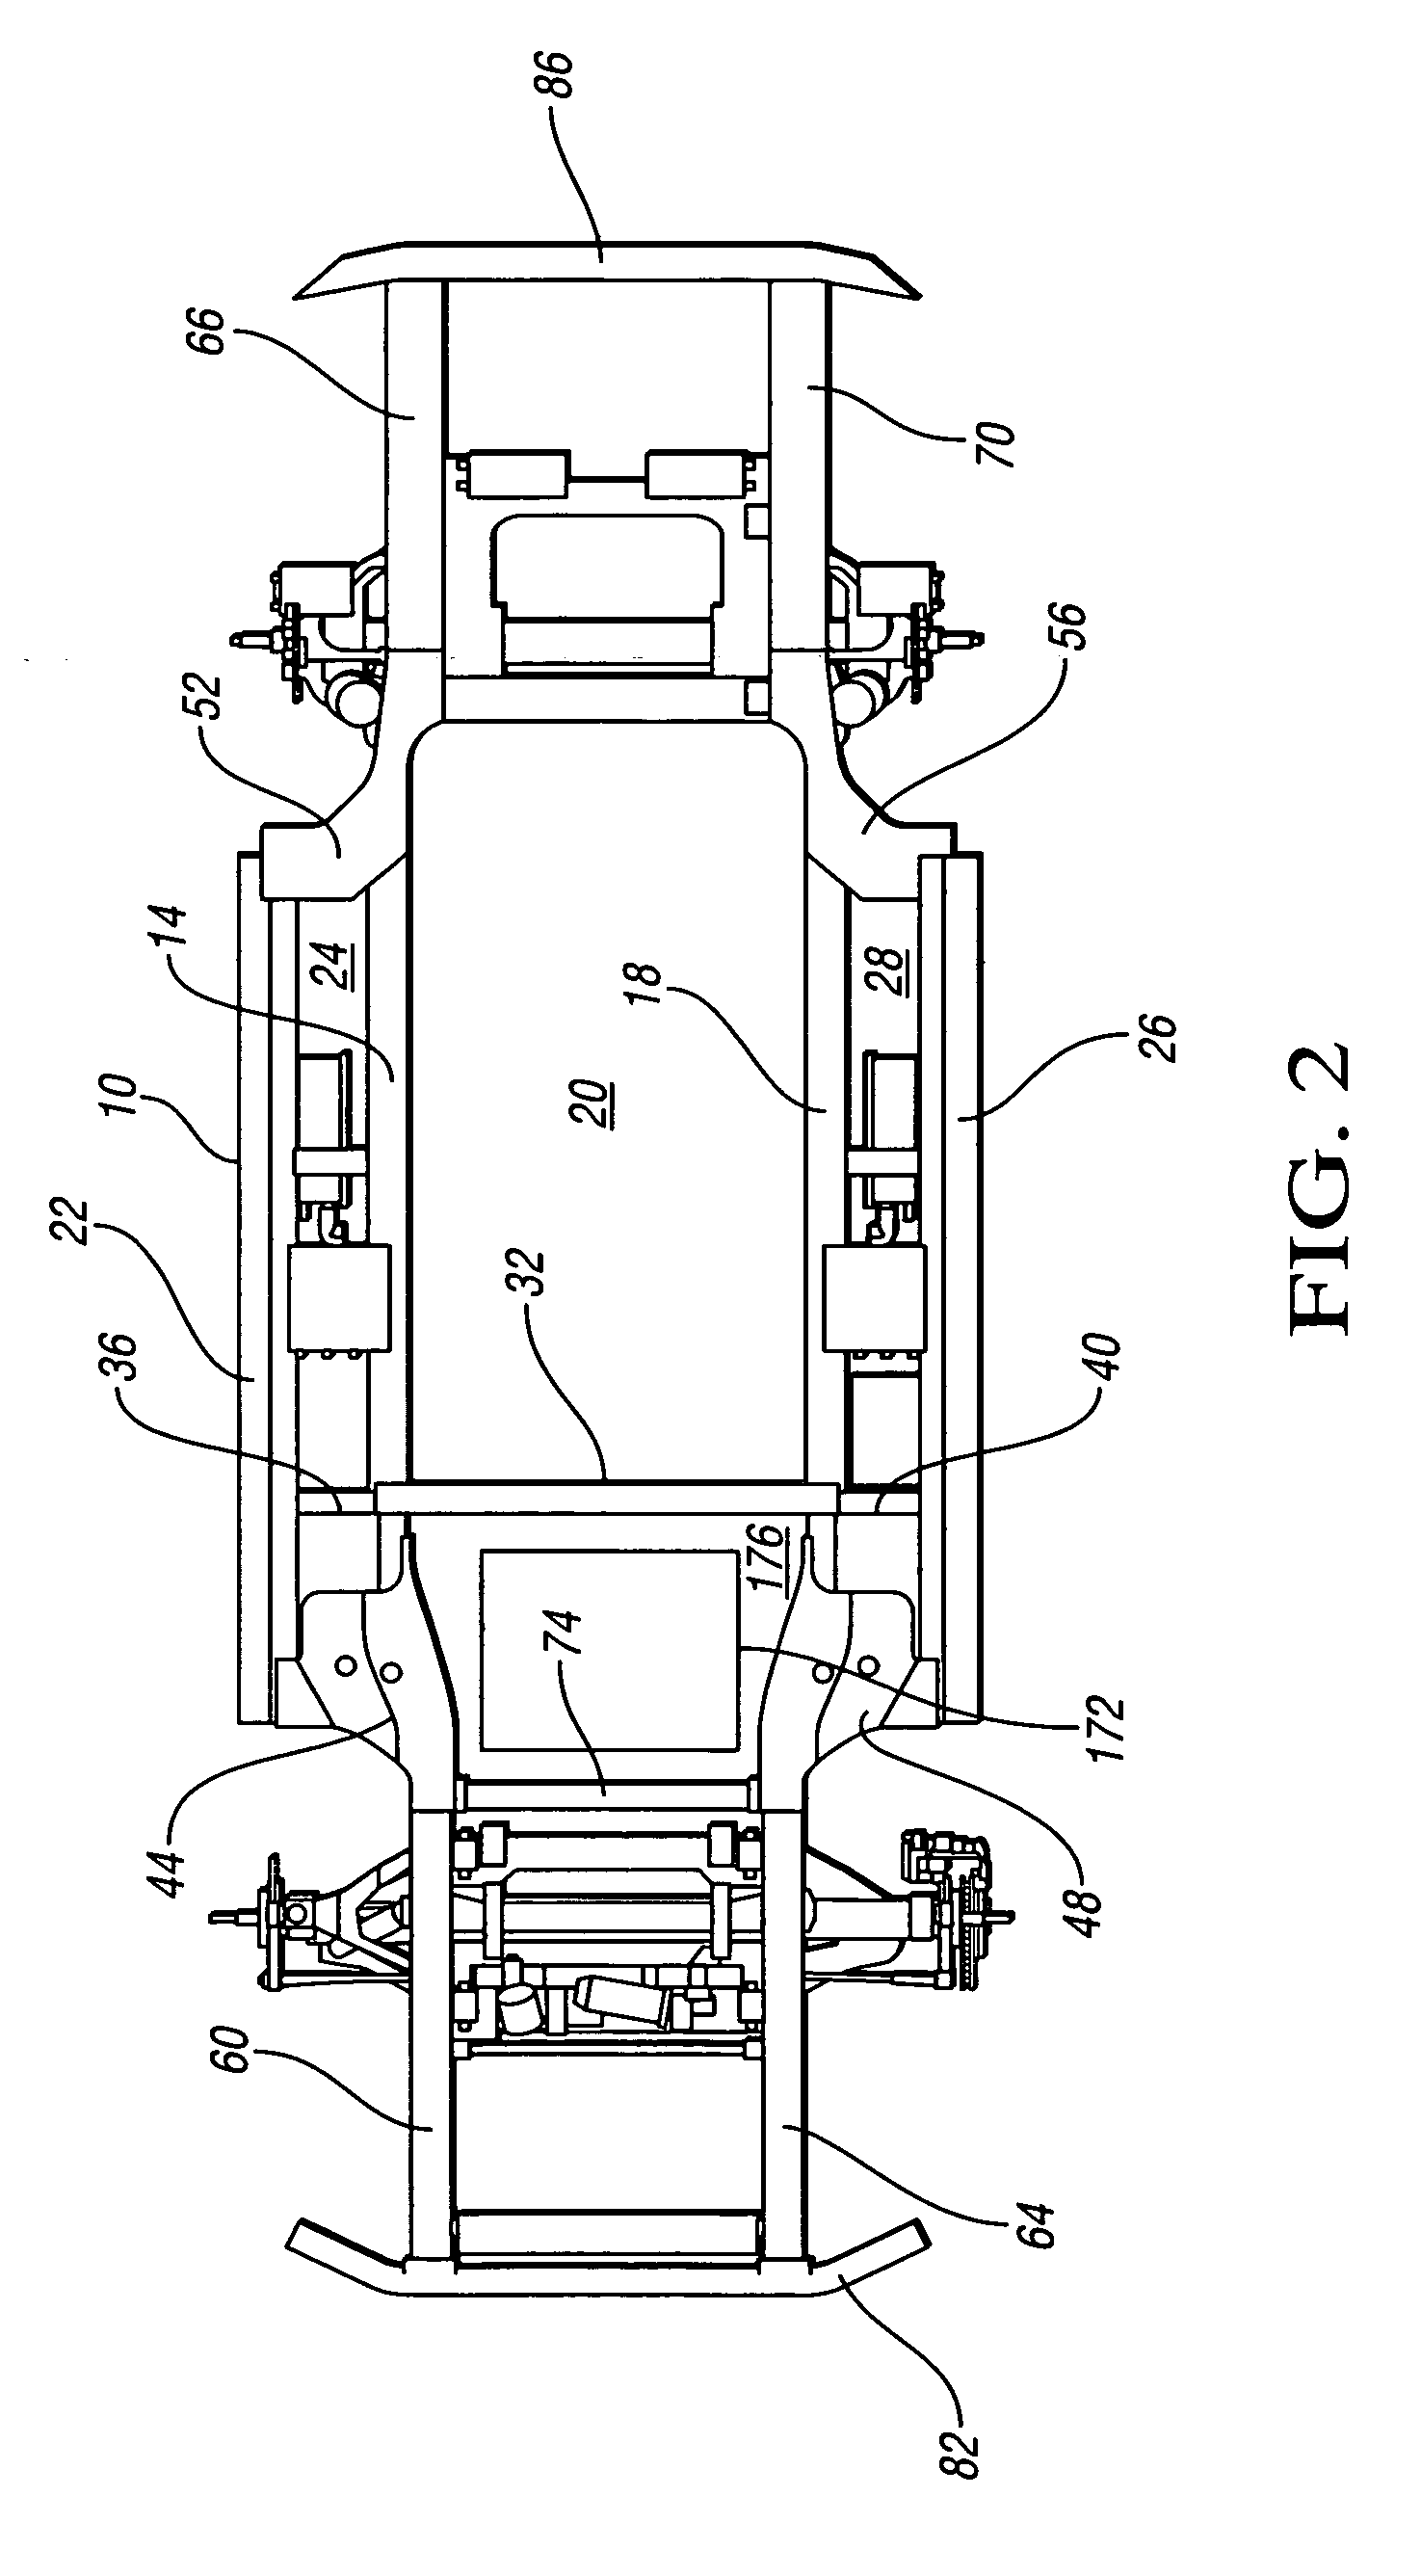 Compressed gas tank carrier assembly